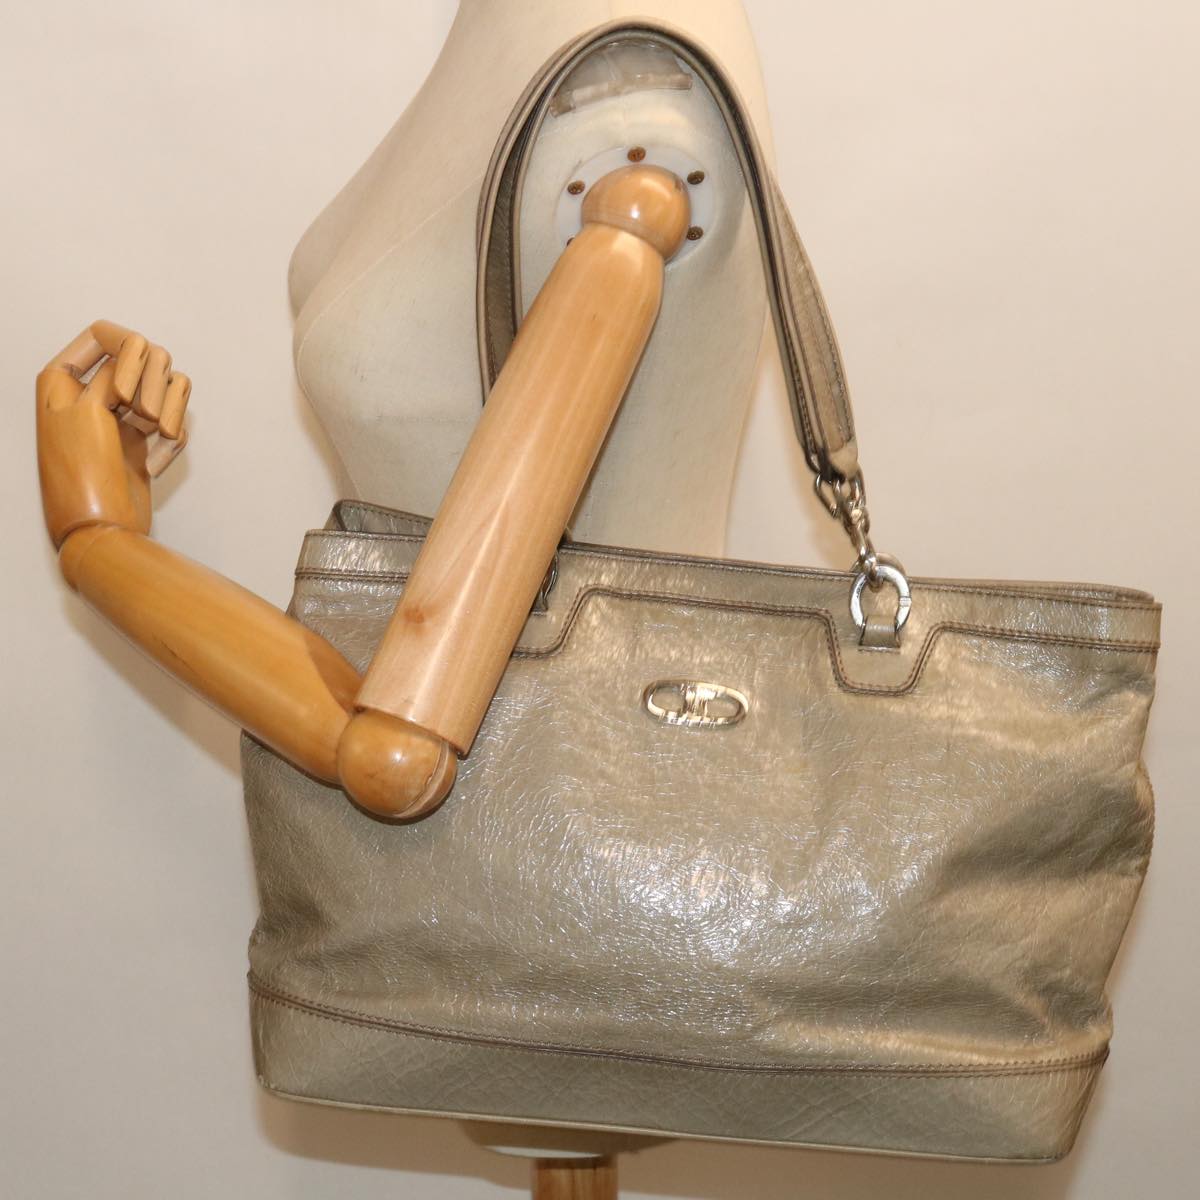 CELINE Tote Bag Patent leather Gray Auth ar11732